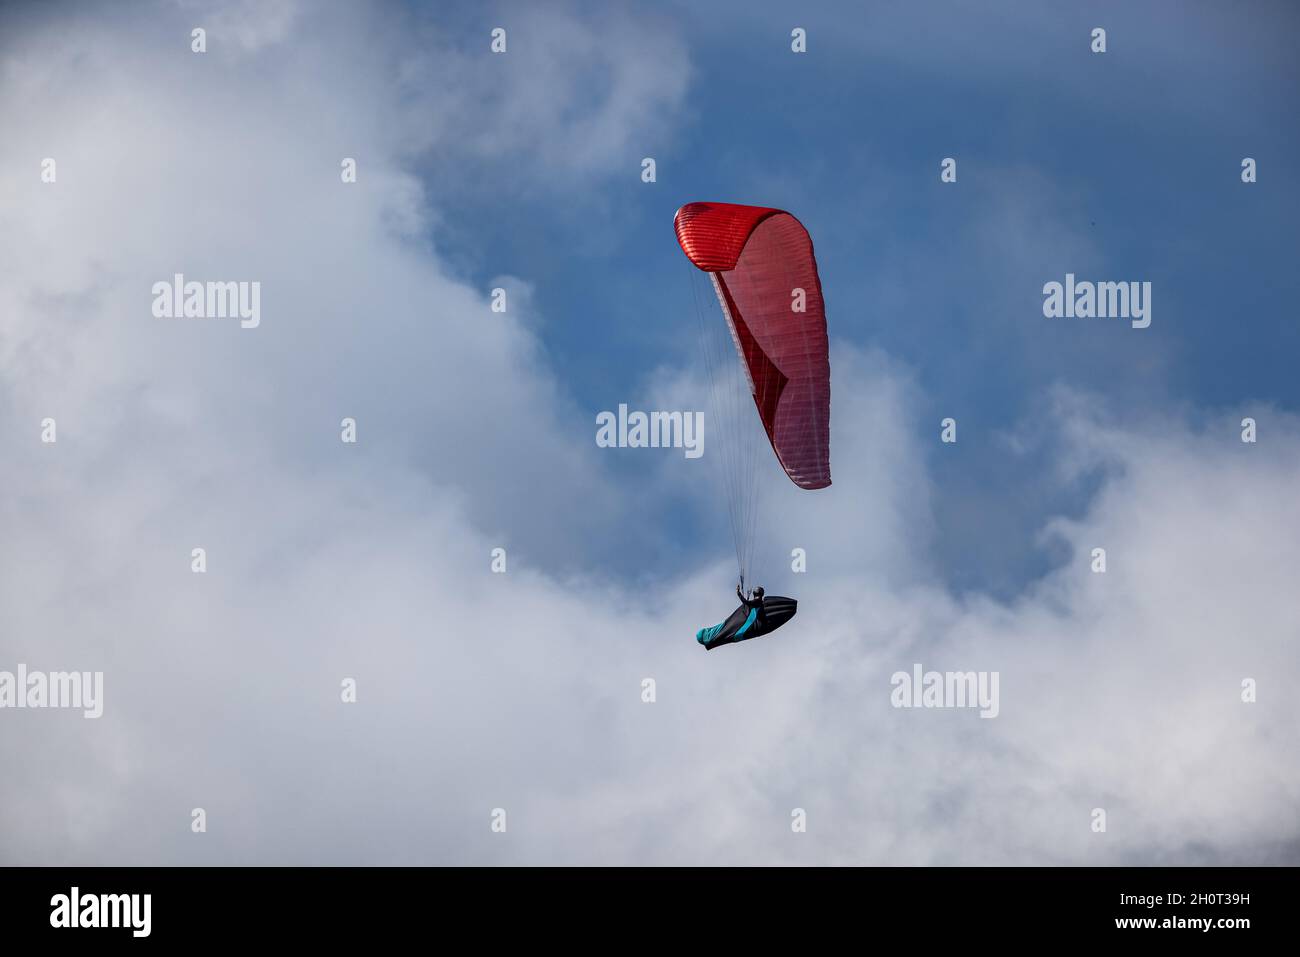 Paraglider is flying in the blue sky against the background of white clouds Stock Photo